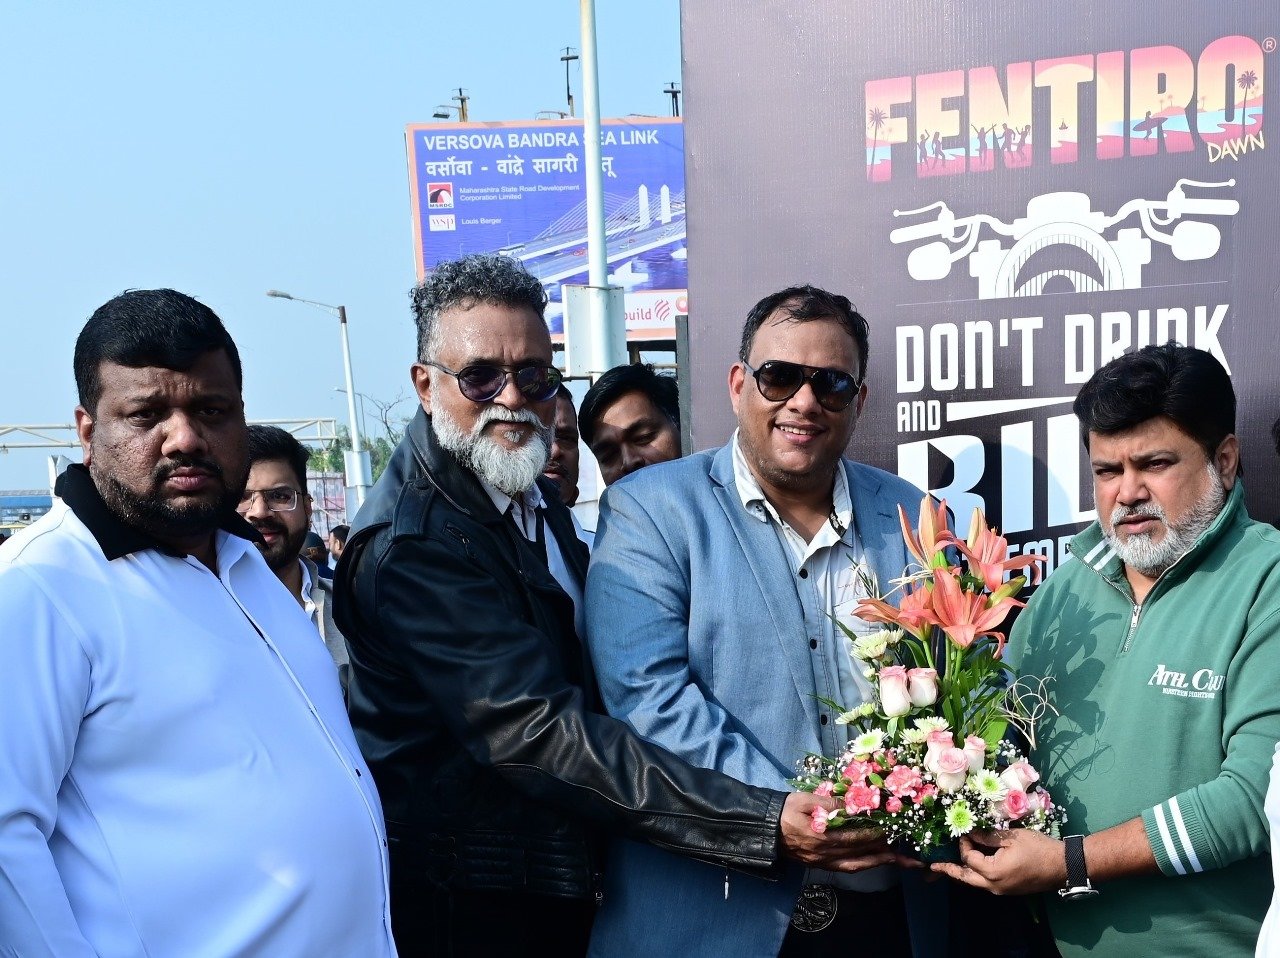 Industry Minister, Uday Samant flags off the ‘Fentiro Don’t Drink & Ride Gentlemen Rally’ with a WROOM